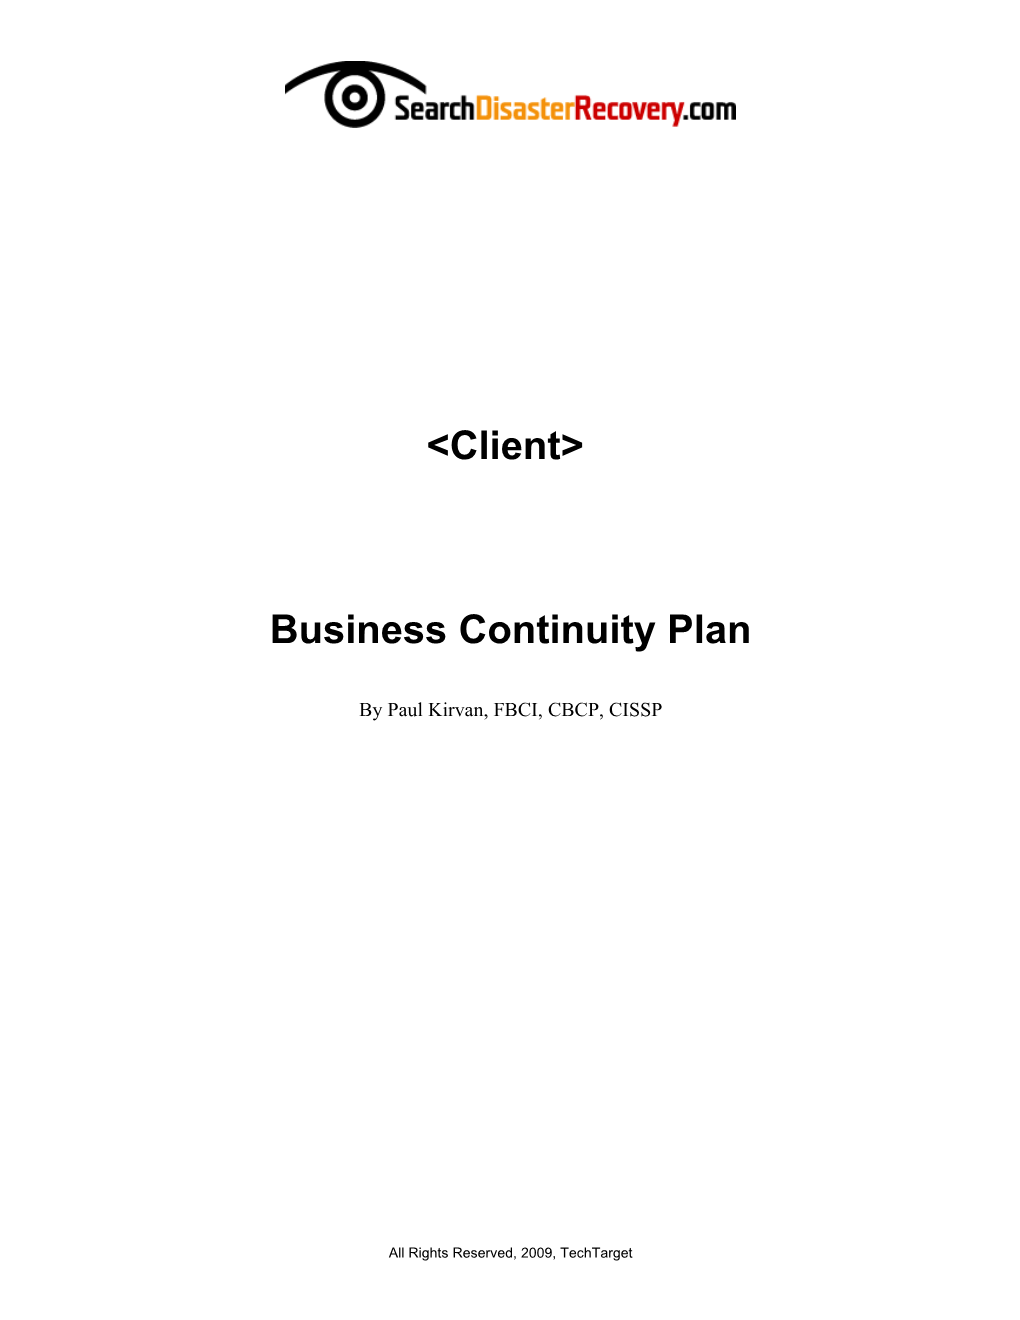 Business Continuity Plan s4